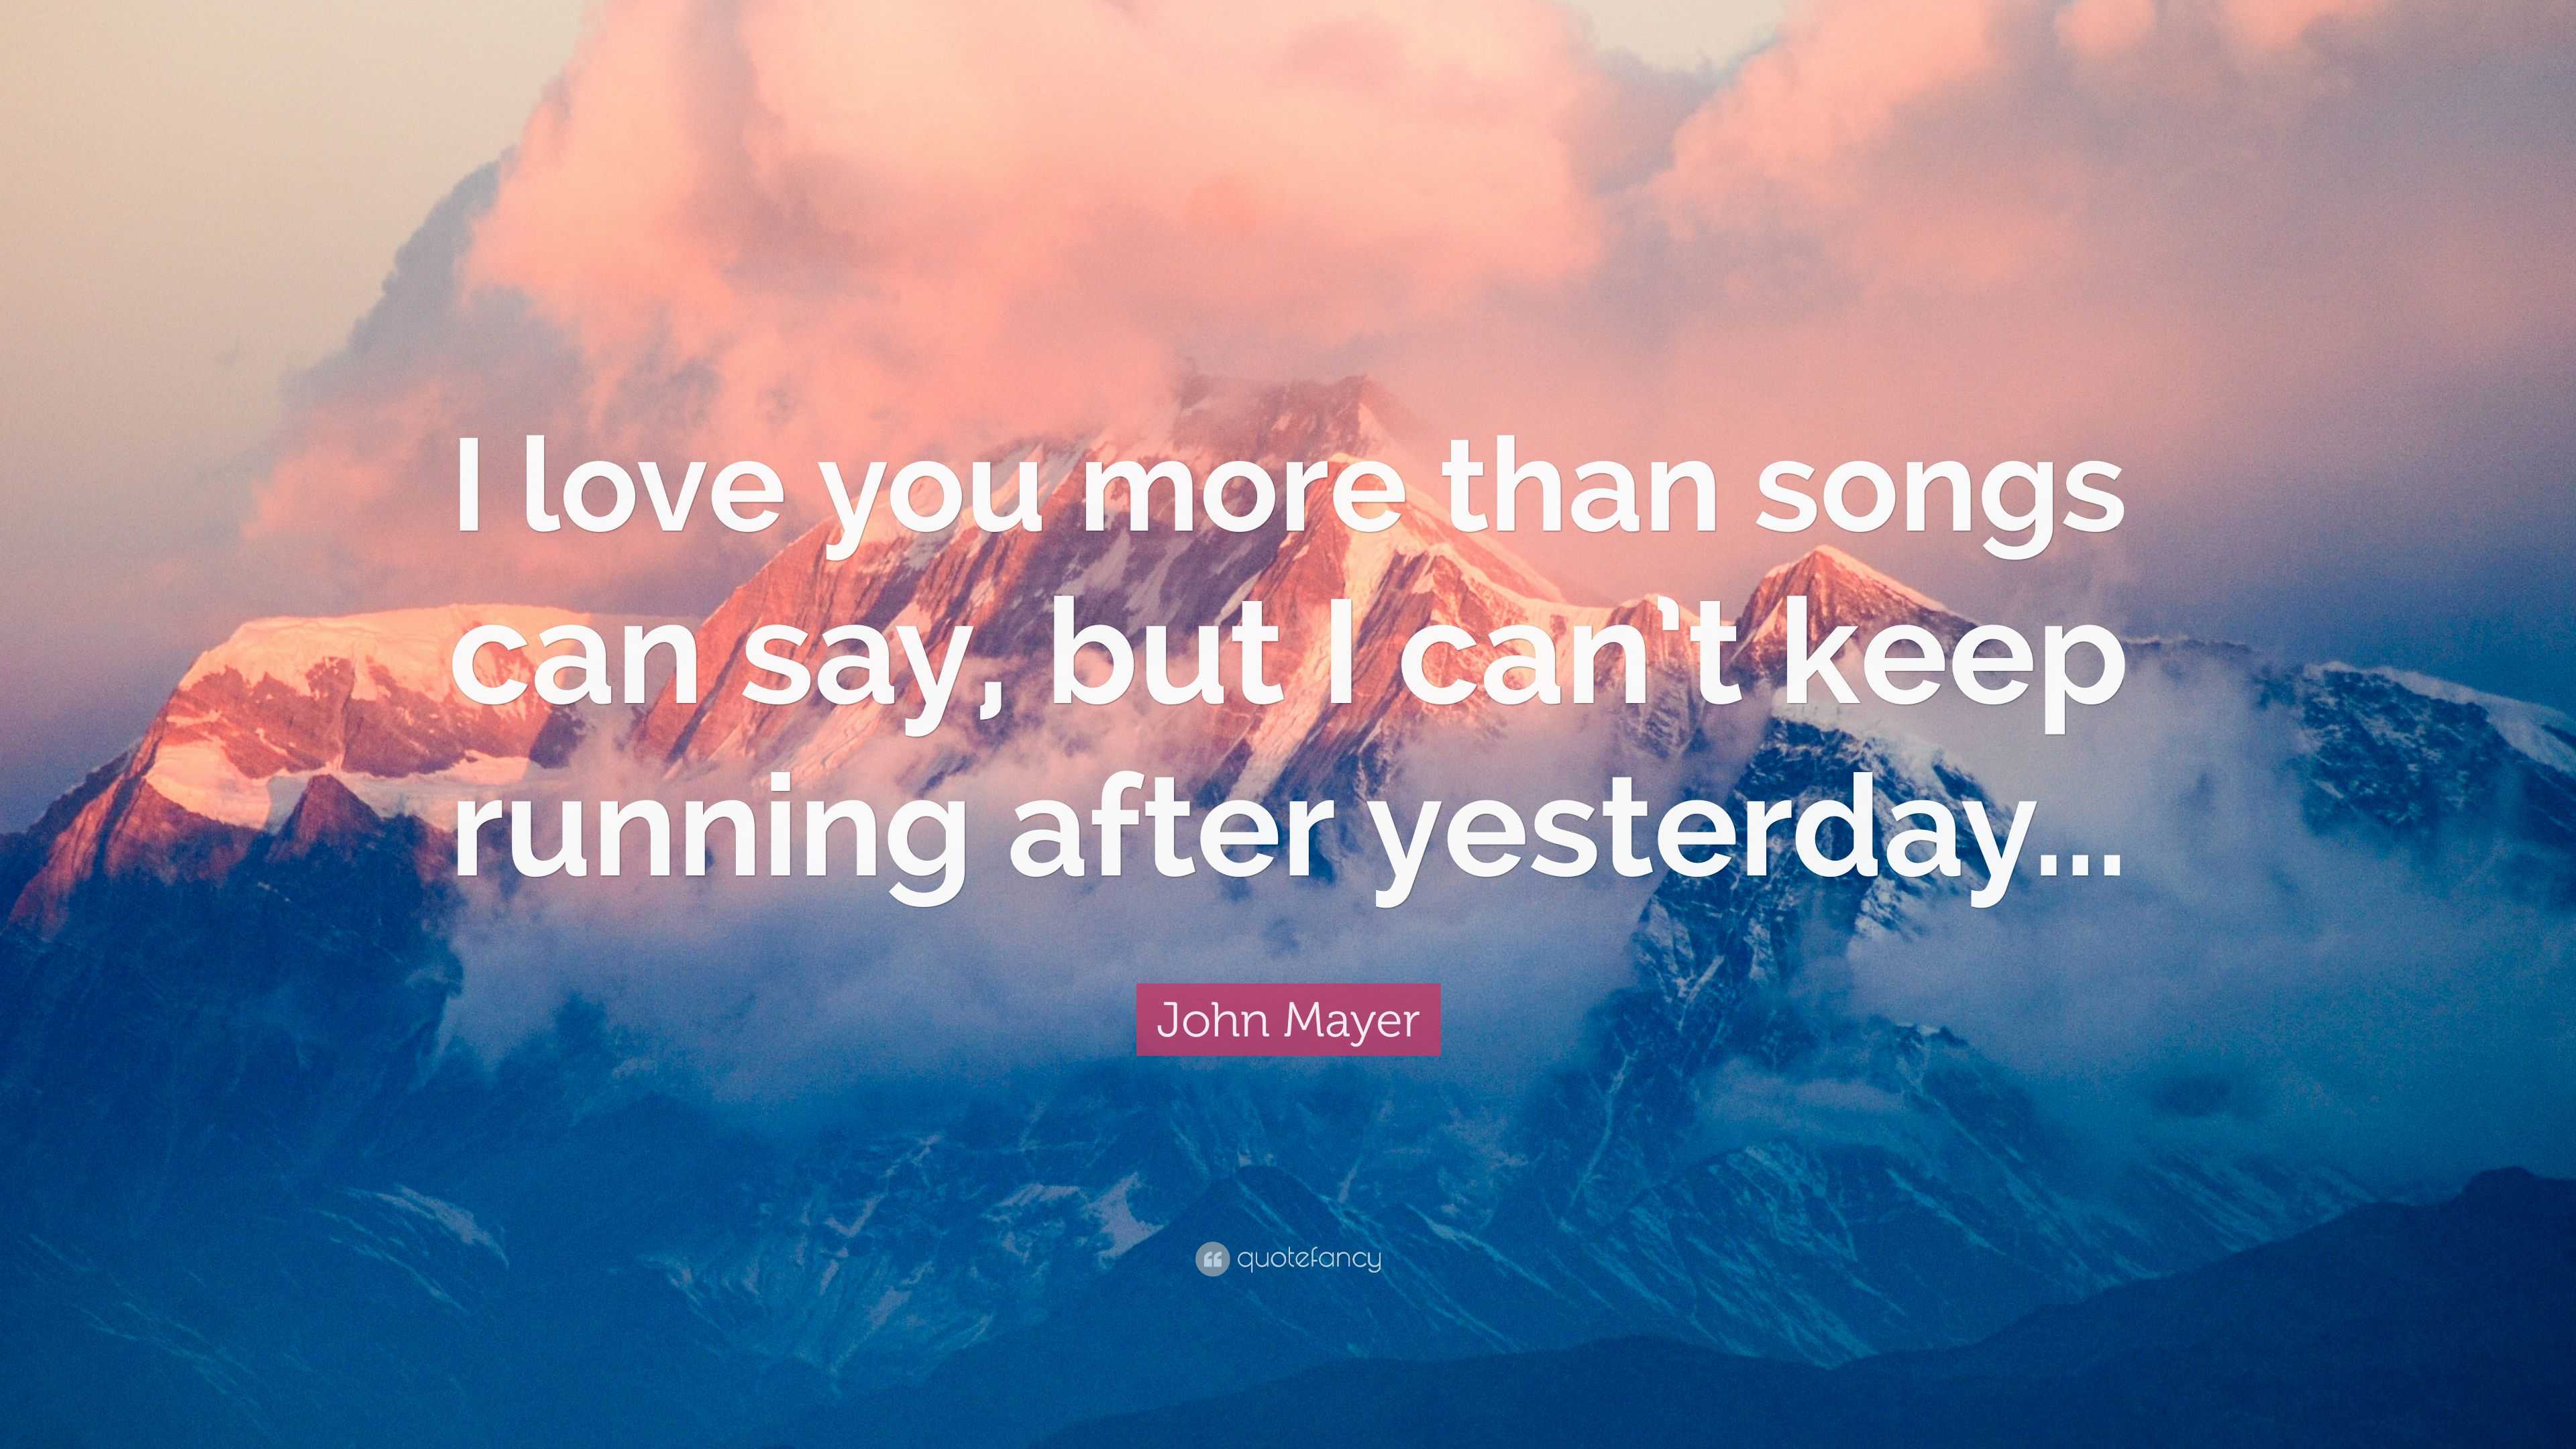 John Mayer Quote “I love you more than songs can say but I